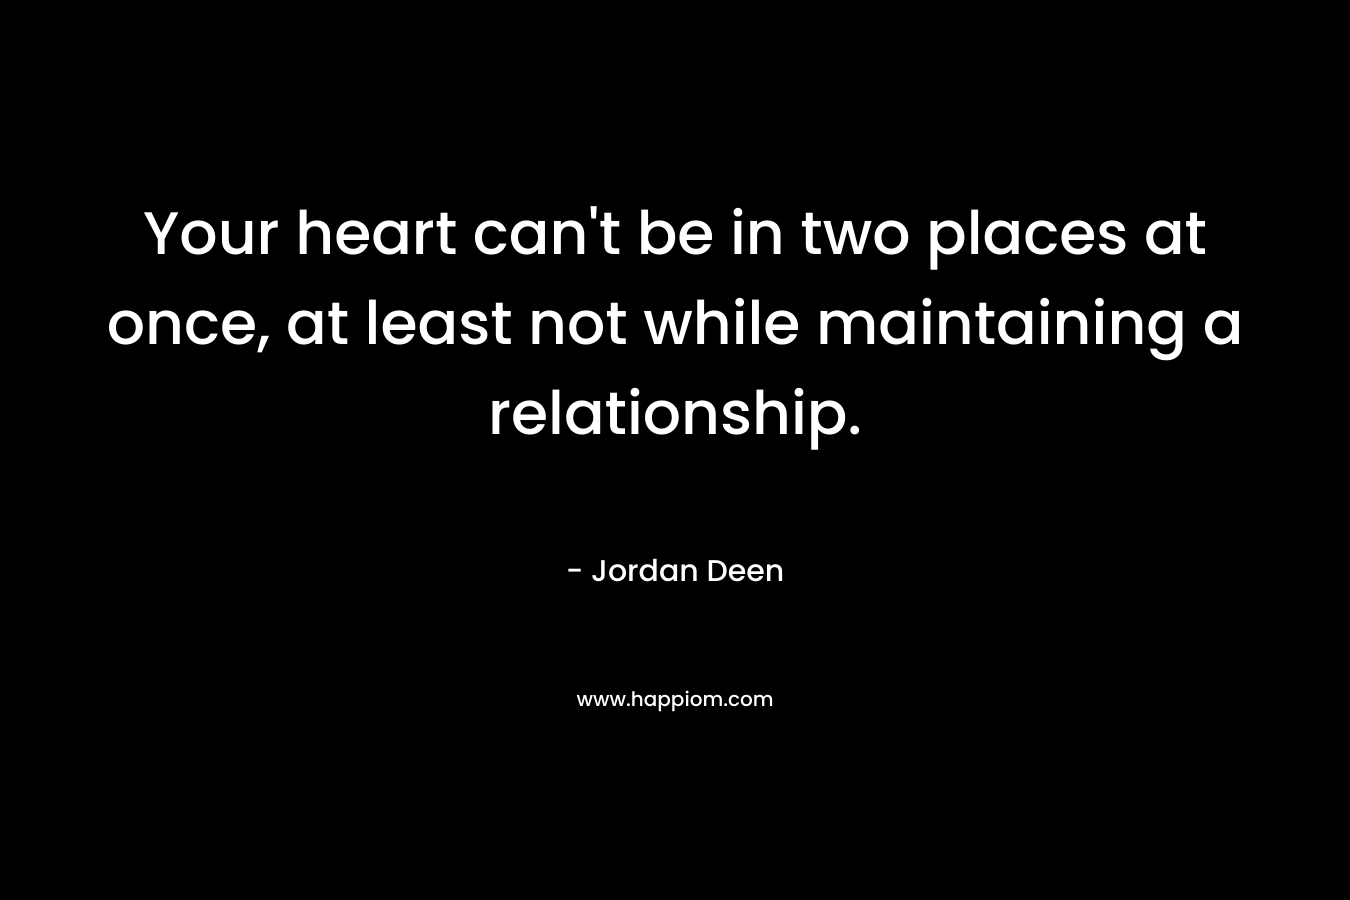 Your heart can’t be in two places at once, at least not while maintaining a relationship. – Jordan Deen